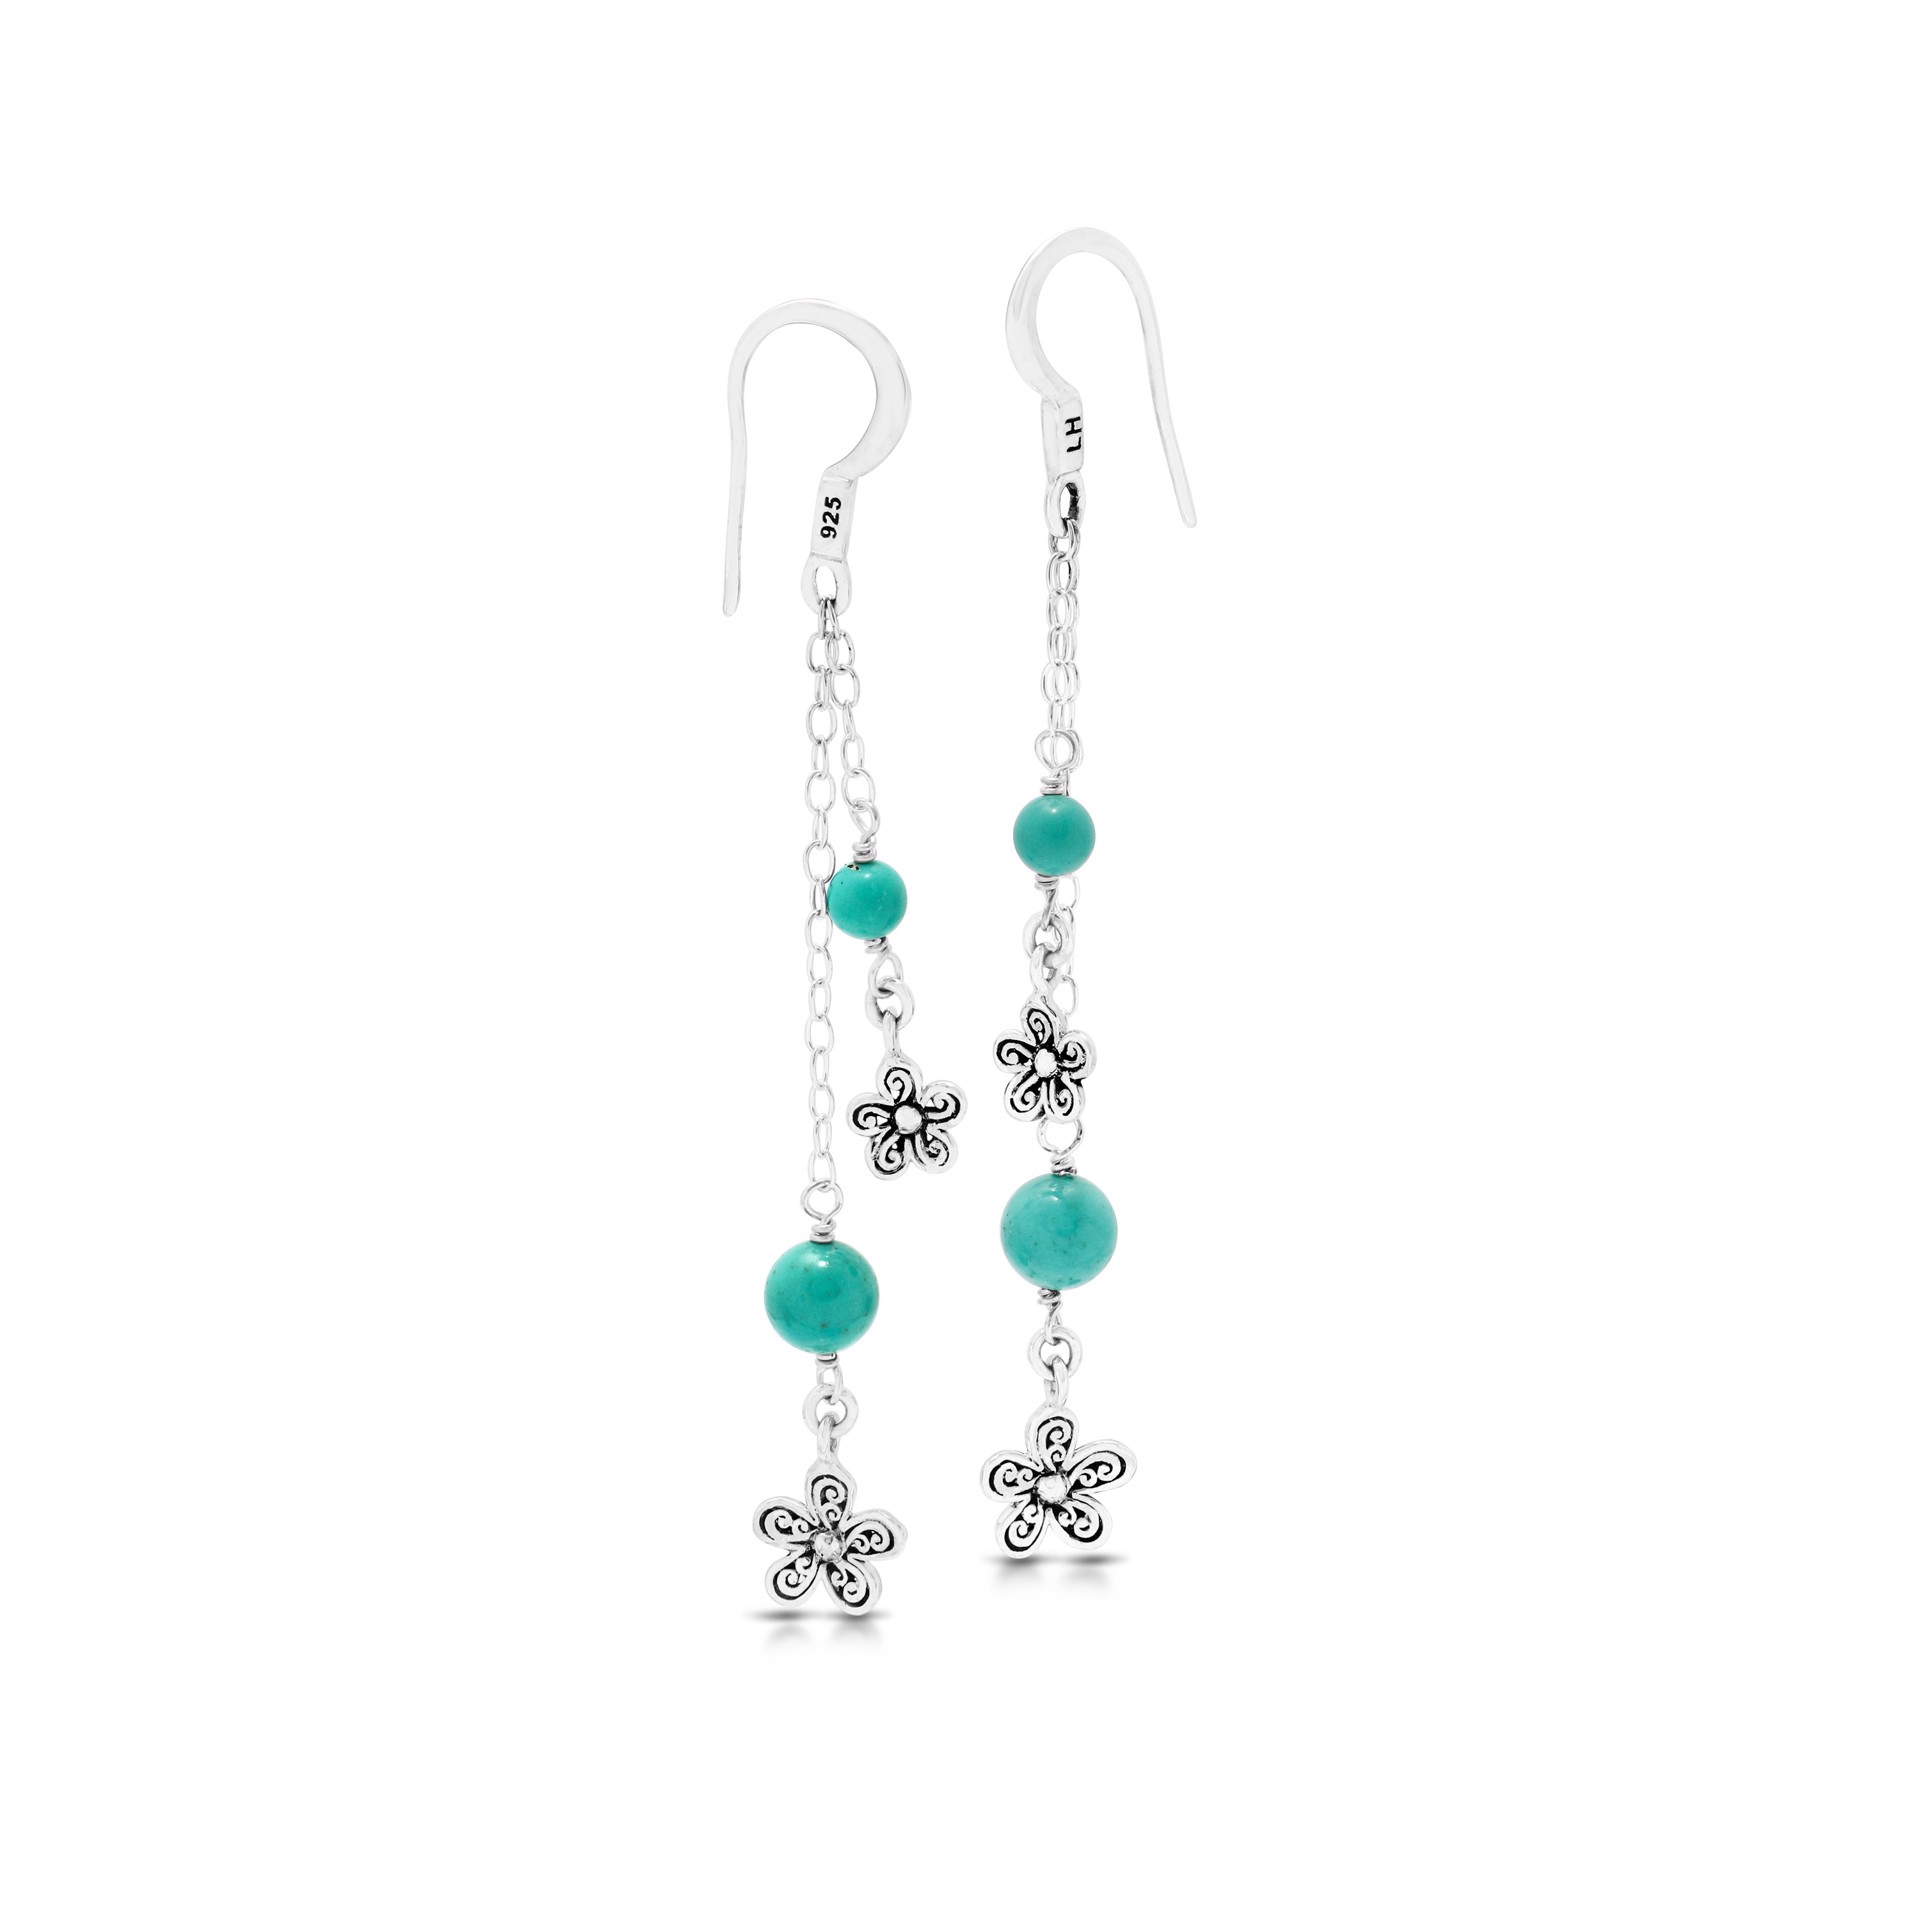 9663 Blue Turquoise Bead with Double Layers Flower Sterling Silver Scroll Drop Fishhook Earrings by Lois Hill